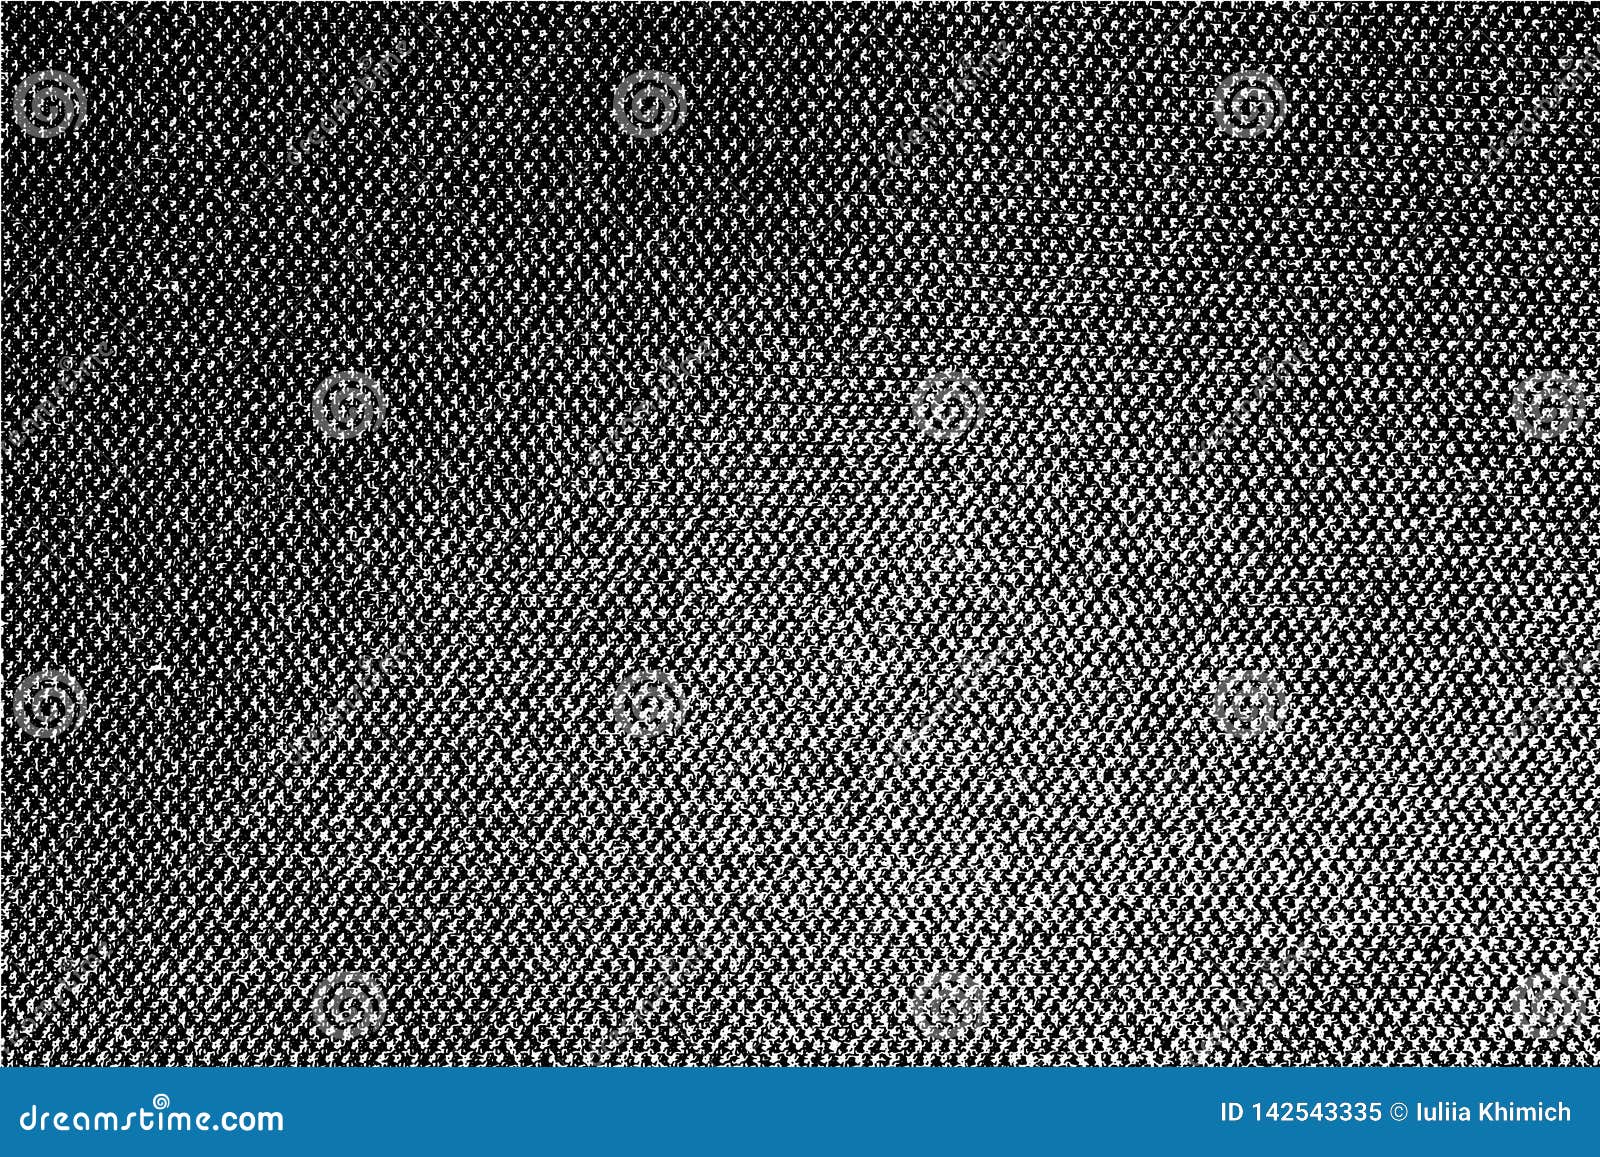 Vector Heavy Fabric Texture. for Posters, Banners and Retro Designs ...